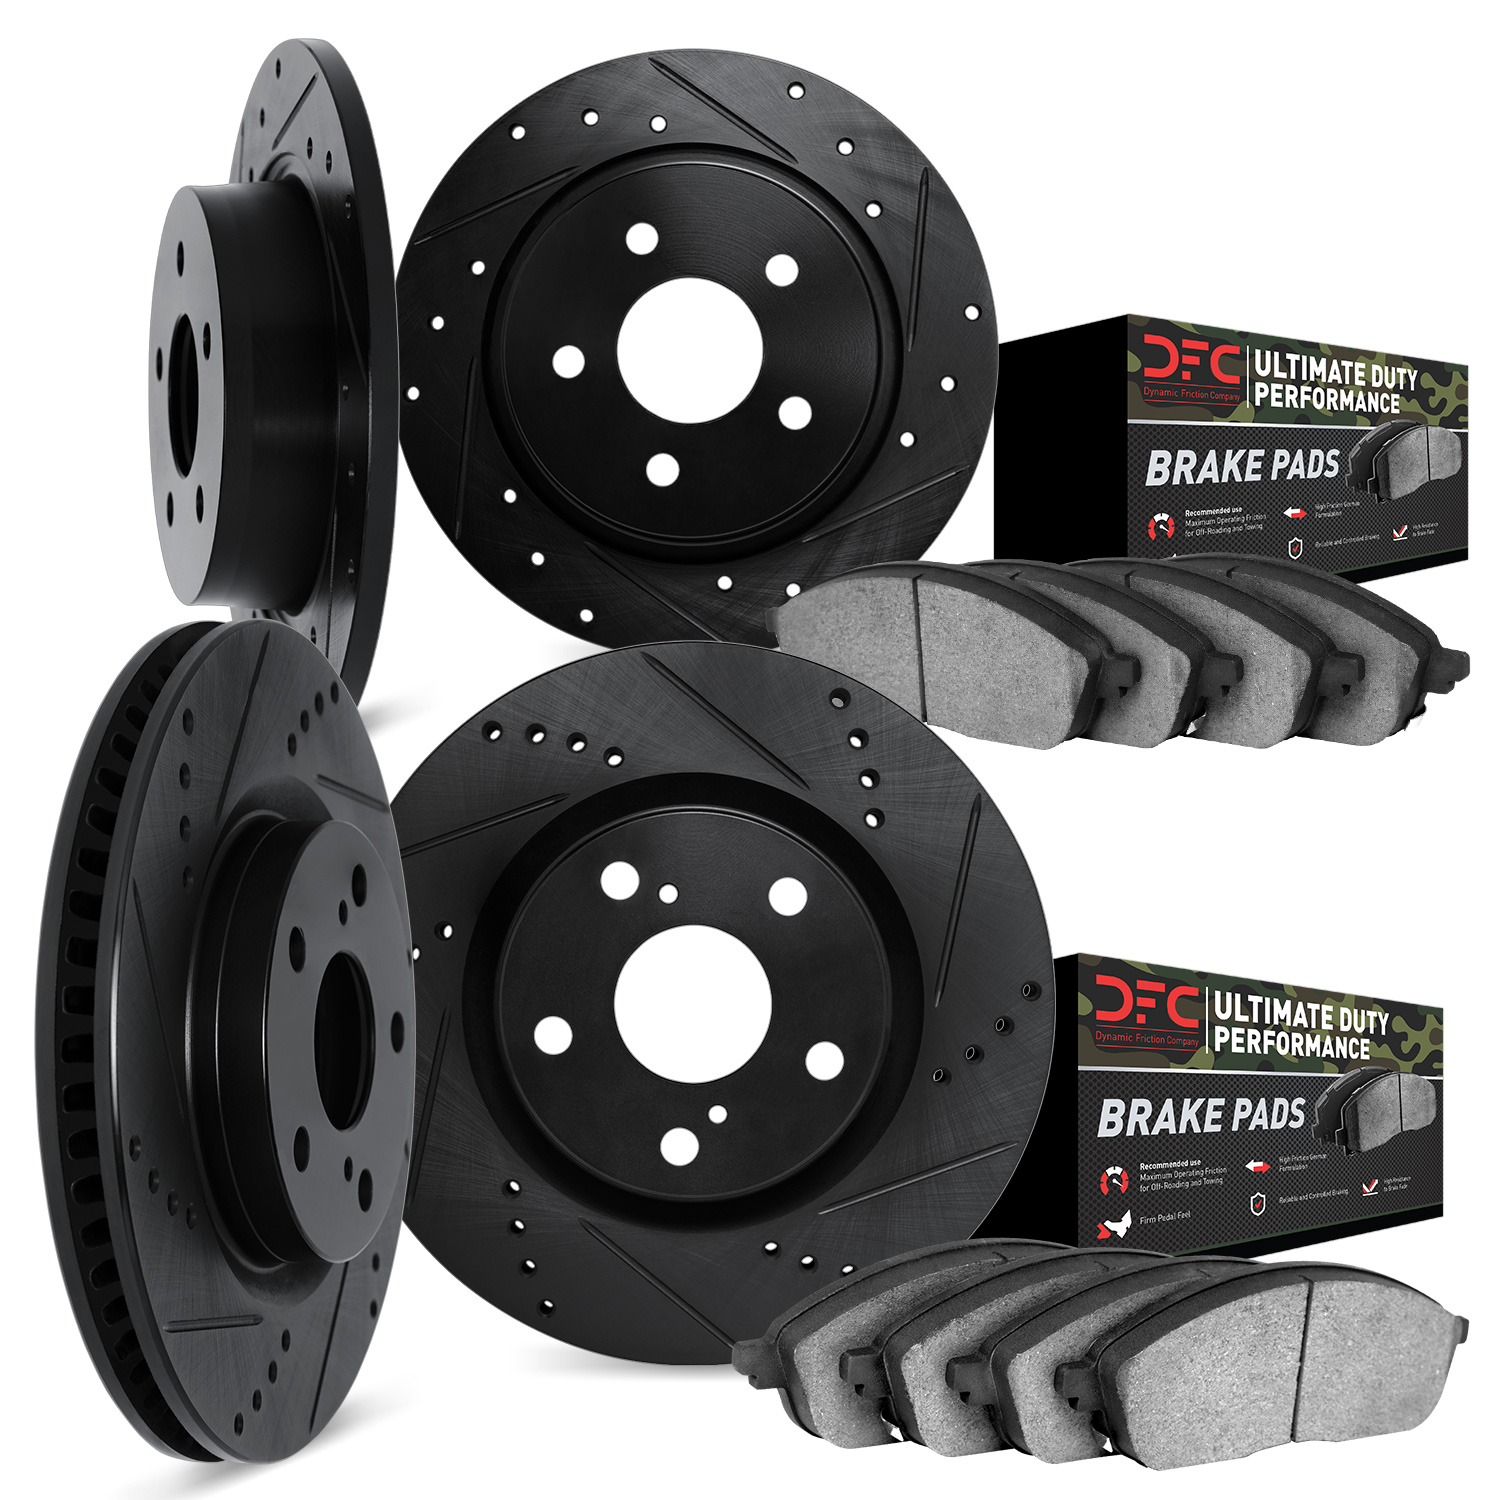 8404-42008 Drilled/Slotted Brake Rotors with Ultimate-Duty Brake Pads Kit [Black], Fits Select Mopar, Position: Front and Rear